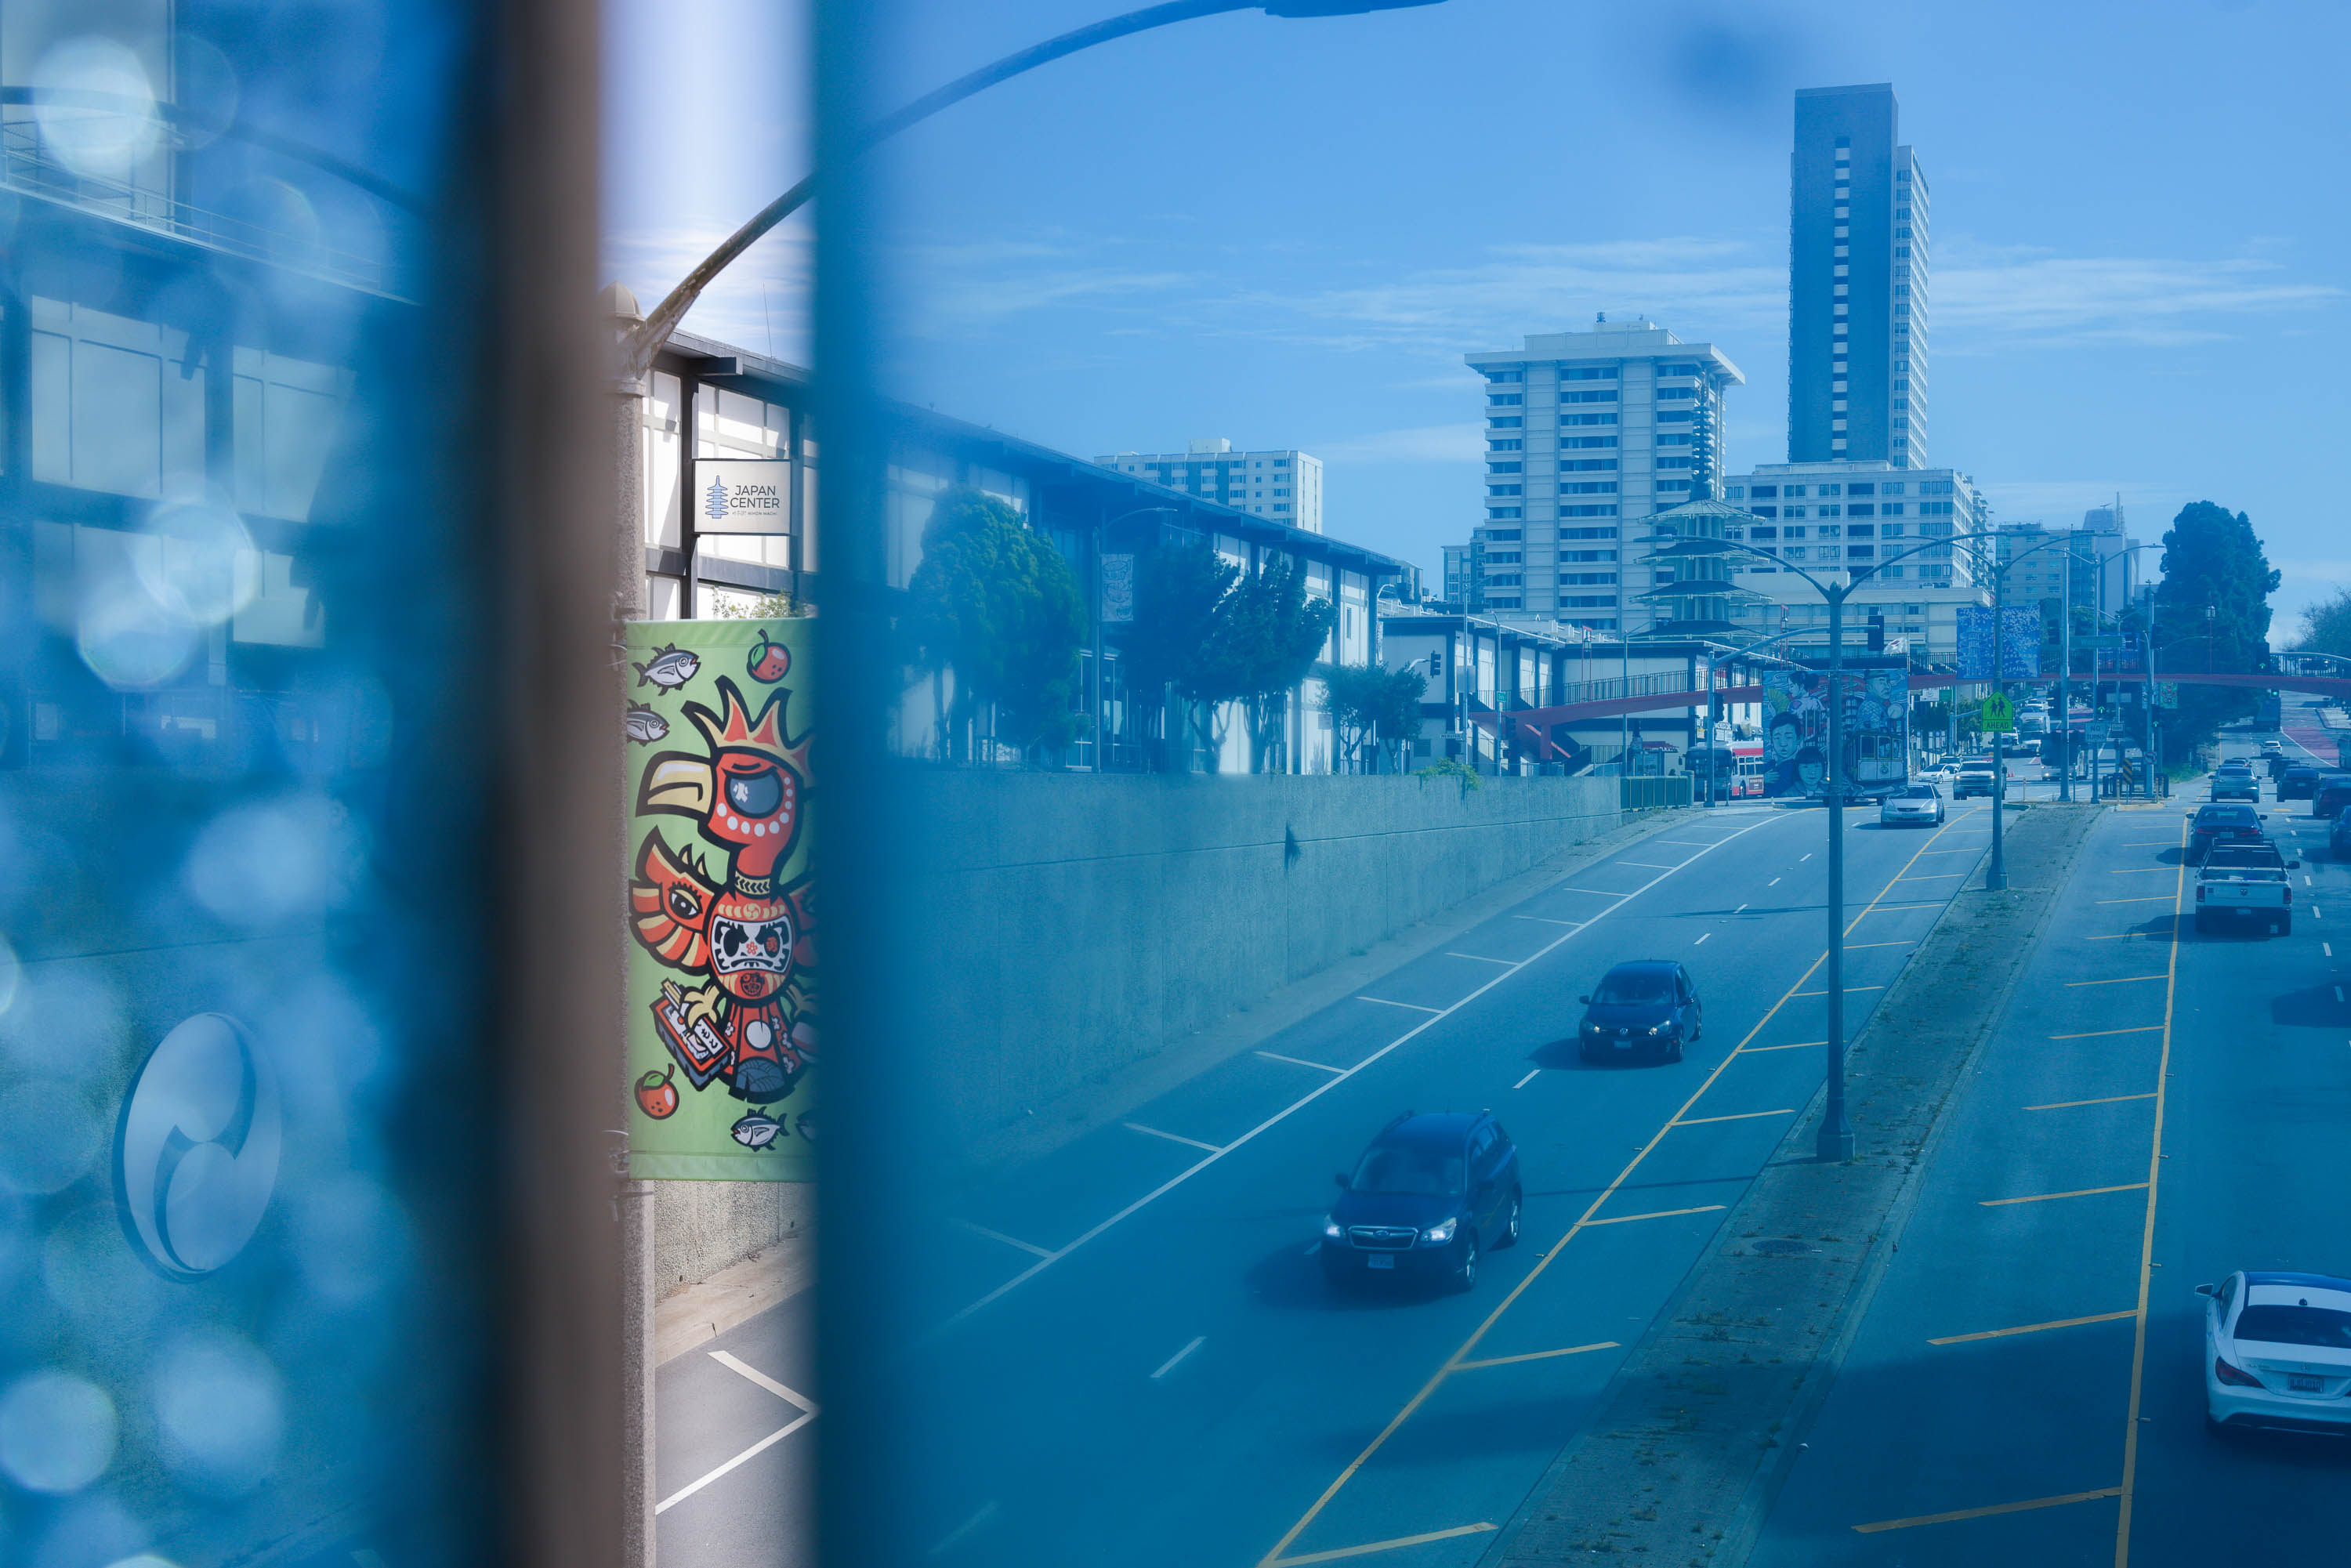 A cityscape with a road, colorful graffiti, moving cars, buildings, and a clear blue sky.